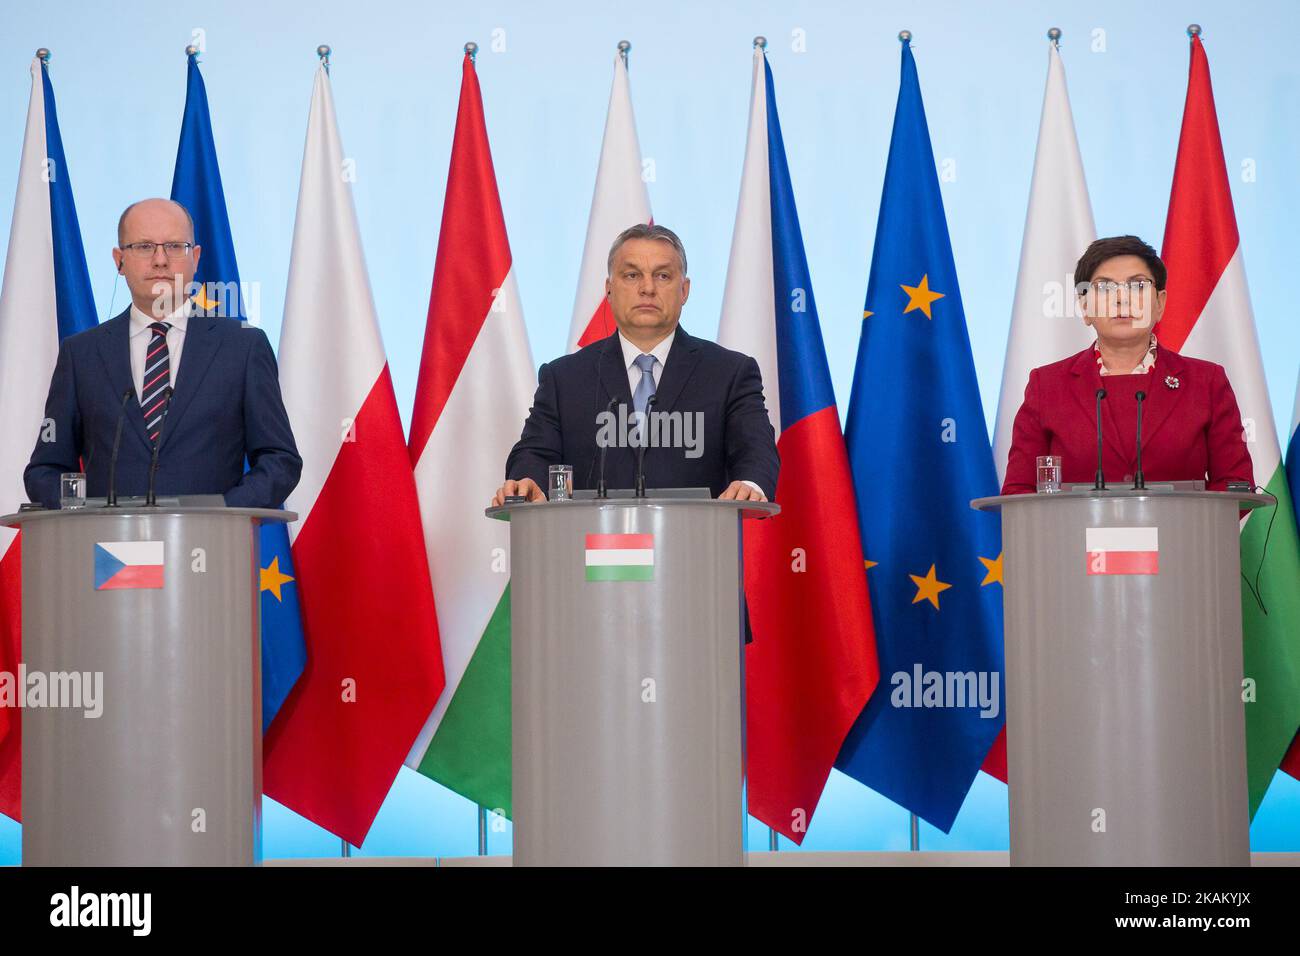 Czech Republic Prime Minister Bohuslav Sobotka, Hungary Prime Minister Viktor Orban, Poland Prime Minister Beata Szydlo during the Visegrad Group meeting in Warsaw, Poland on 2 March 2017 (Photo by Mateusz Wlodarczyk/NurPhoto) *** Please Use Credit from Credit Field *** Stock Photo